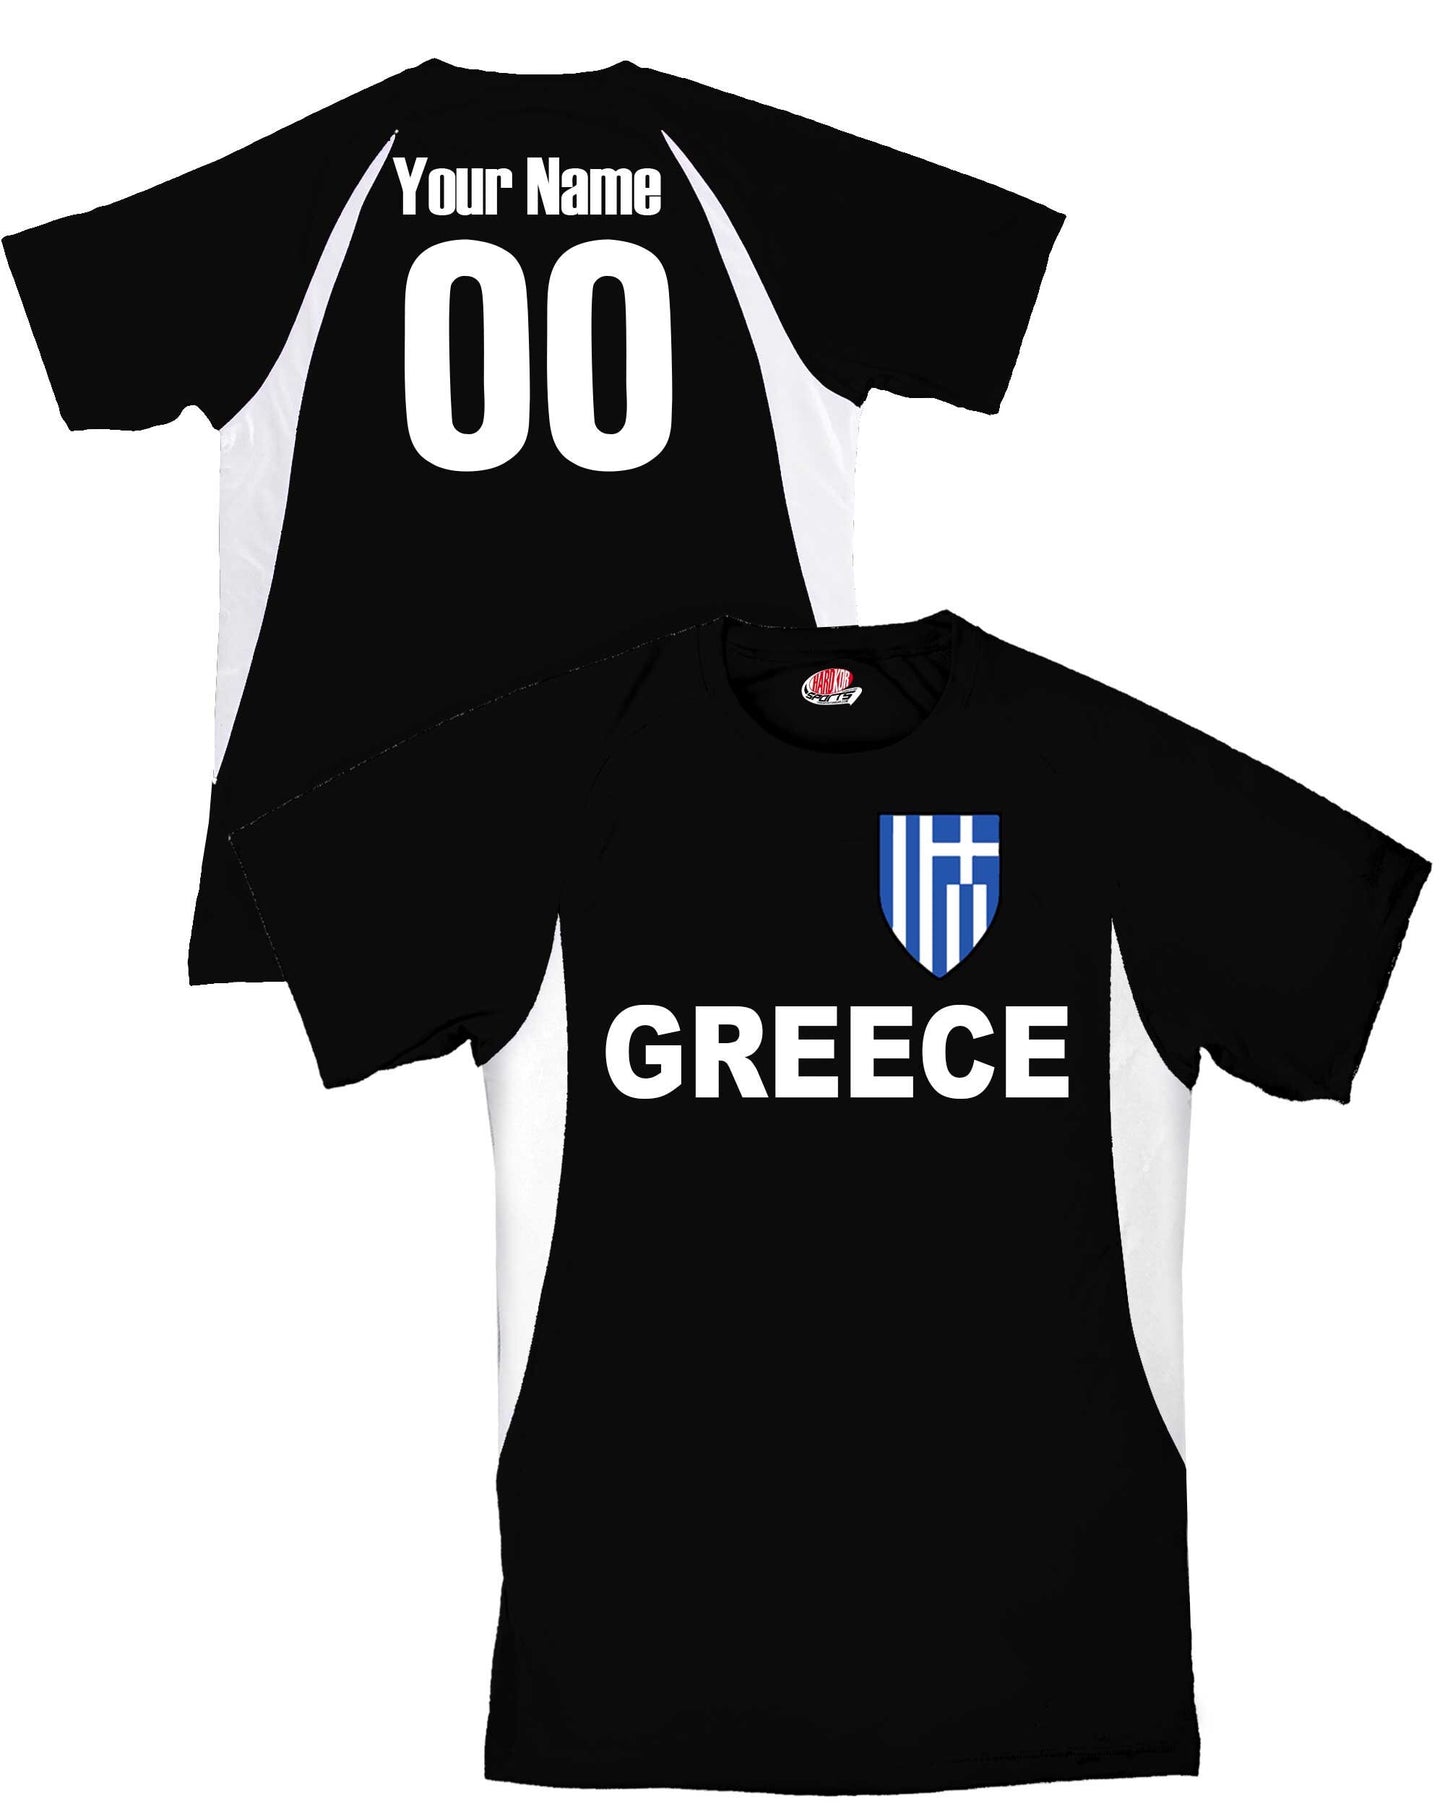 Custom Greece Soccer Jersey with Grecian Flag Shield Design | Personalized with Your Name and Number in Your choice of colors